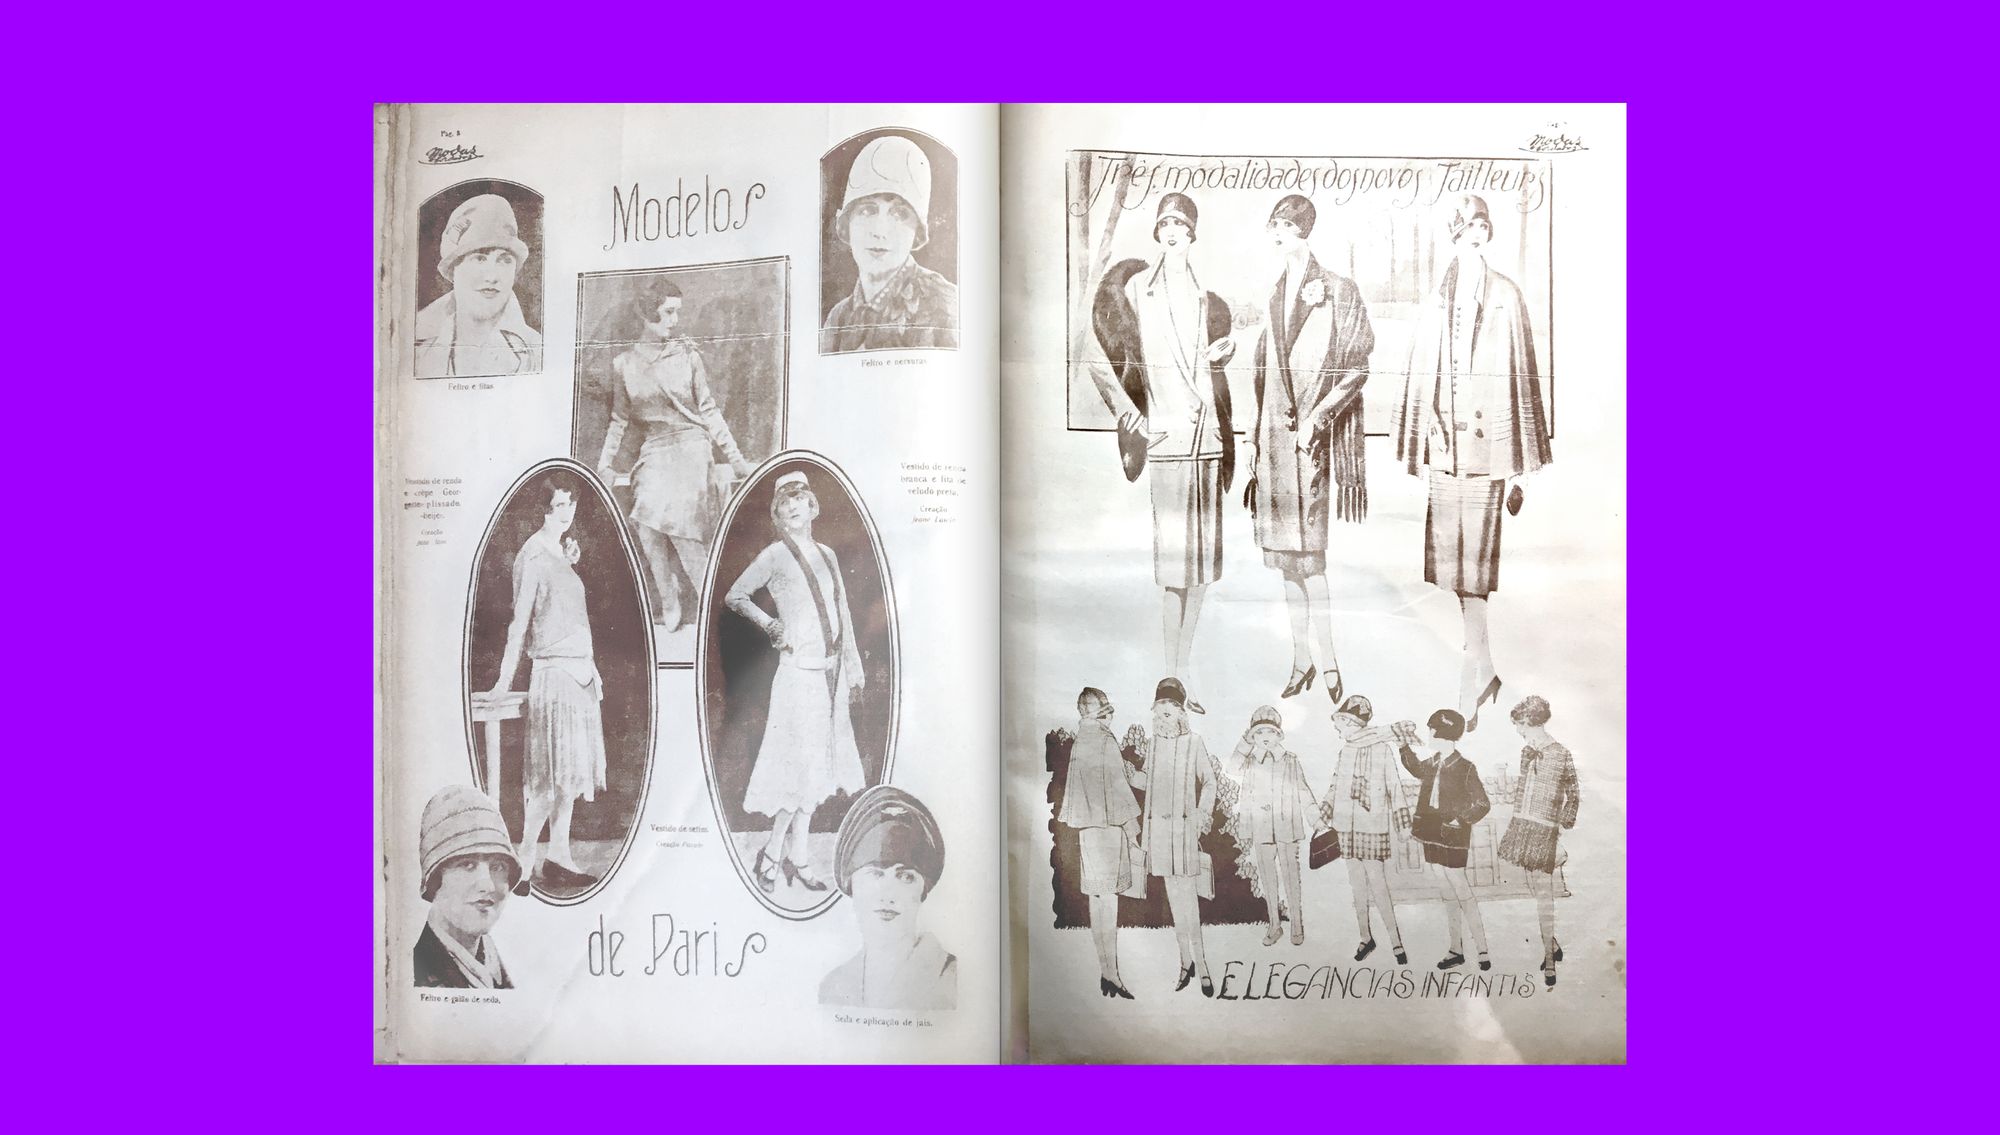 An example of the illustrated centerpiece in an issue of Modas & Bordados from 1929, showing a selection of trends